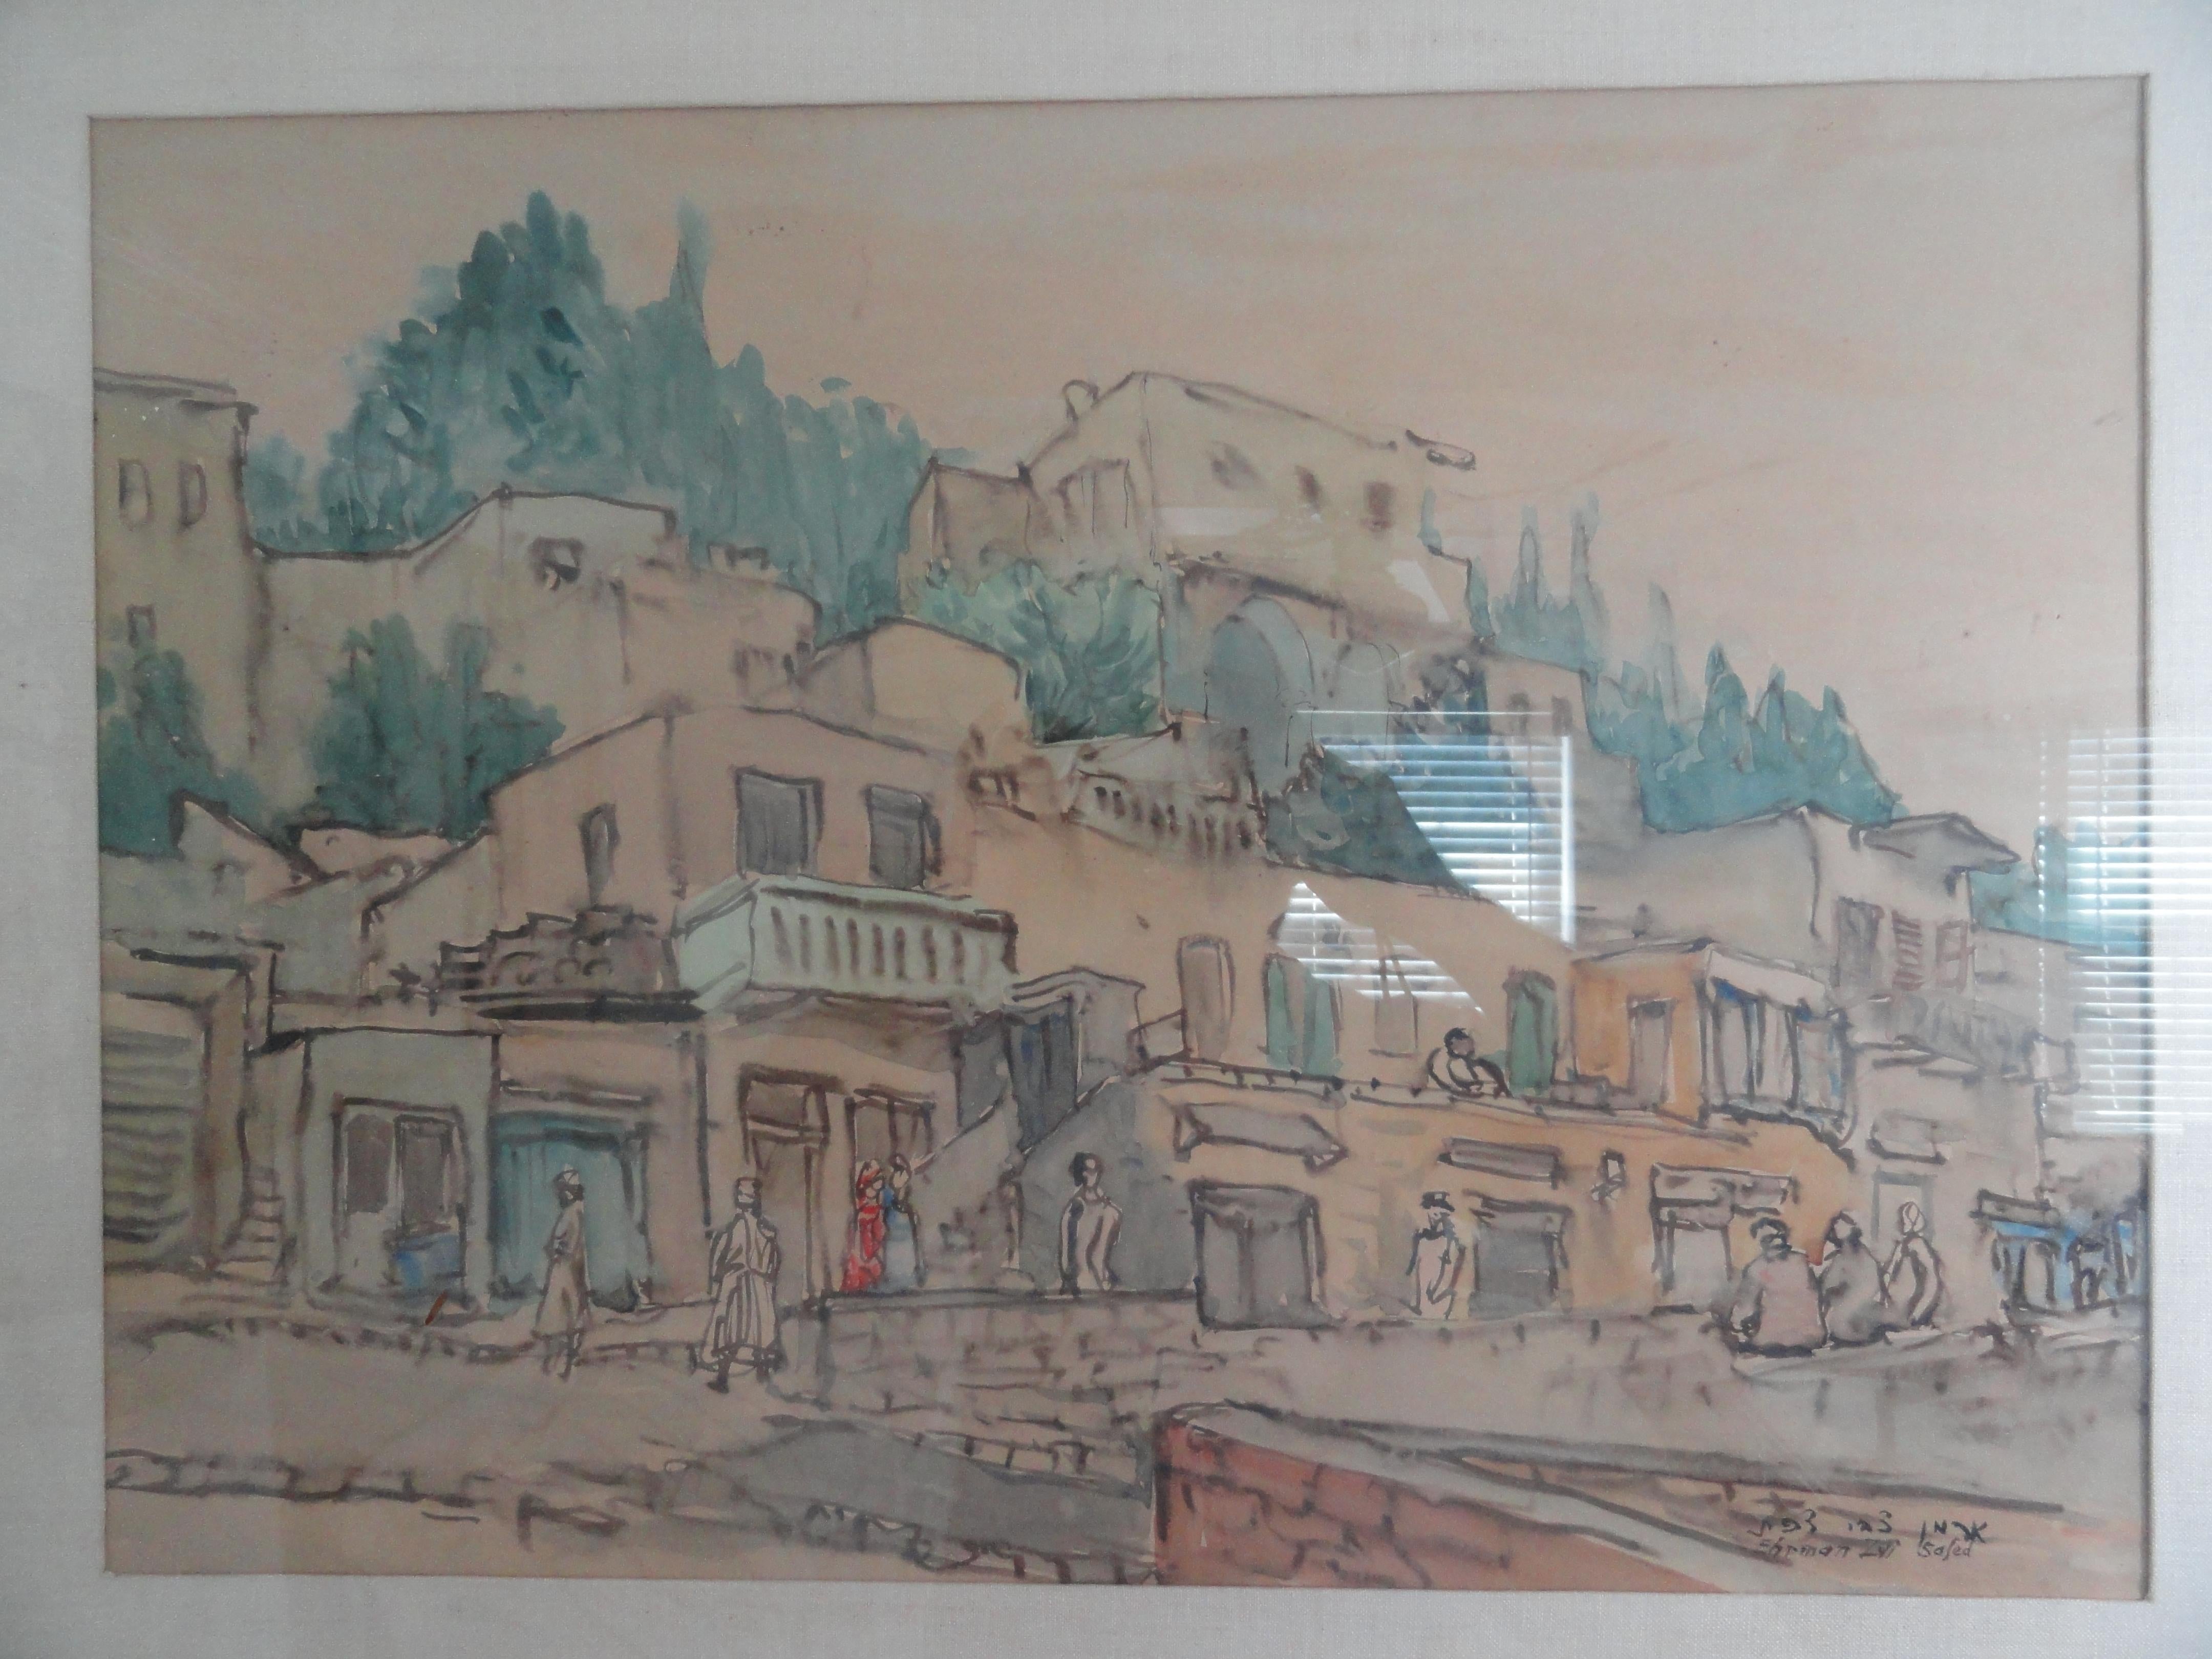 Zvi Ehrman (1903-1993) signed water color. Krakow, Ploand, 1903, Safed, Isreal, 1993.
Zvi Ehrman was a talented aquarelist who focused his work on Jewish subjects and landscapes to Israel. He studied at the Art Academy of Krakow and taught art at